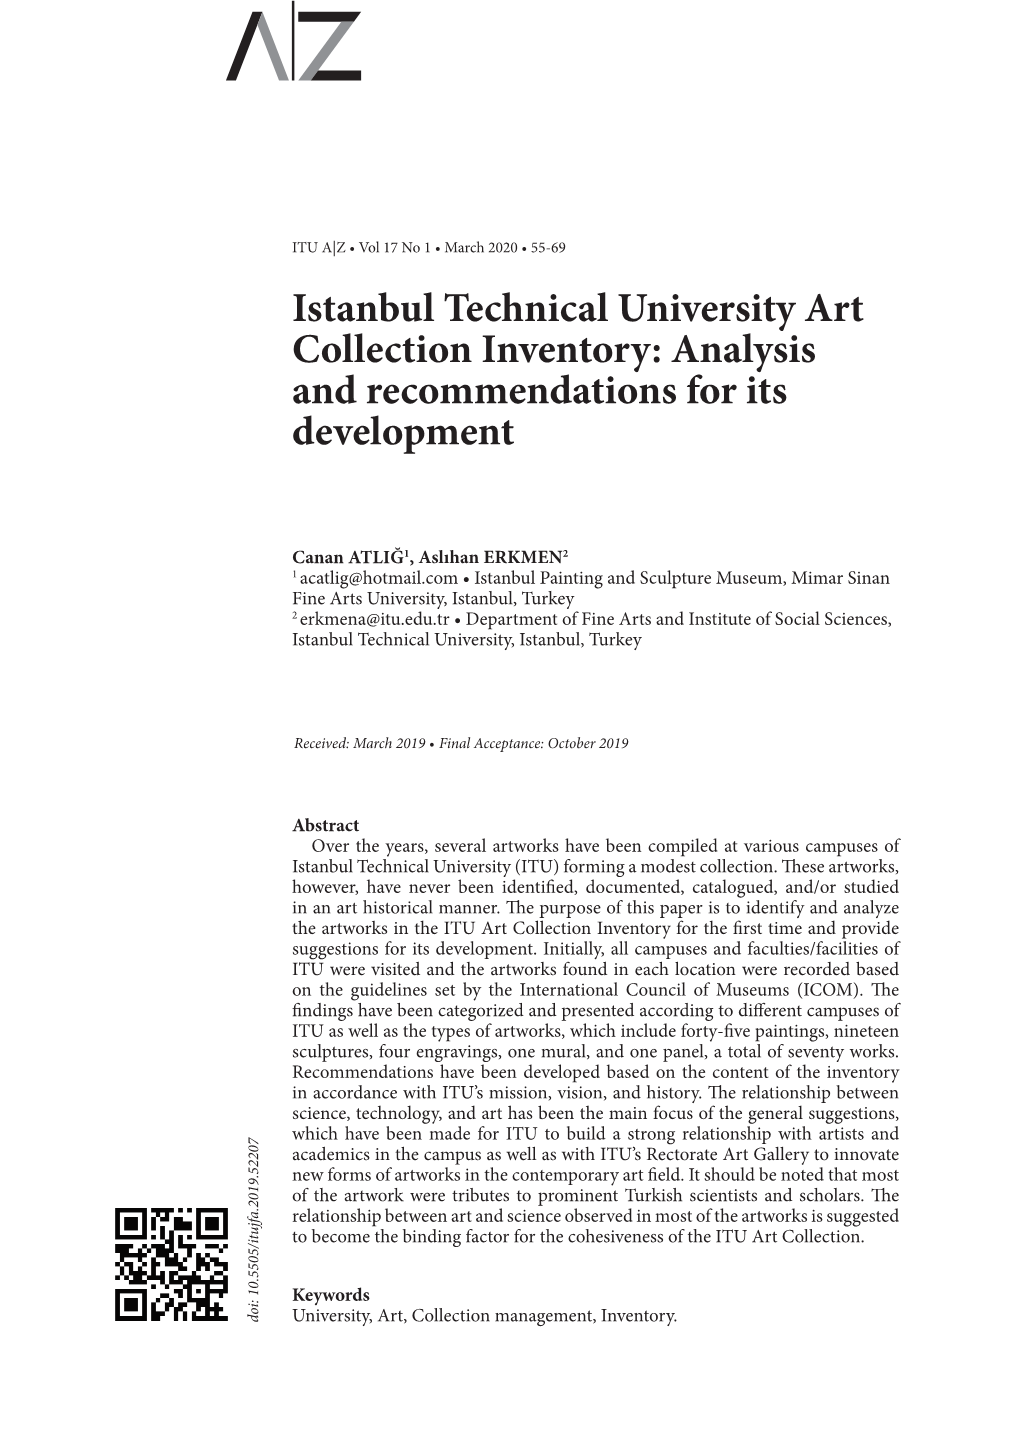 Istanbul Technical University Art Collection Inventory: Analysis and Recommendations for Its Development